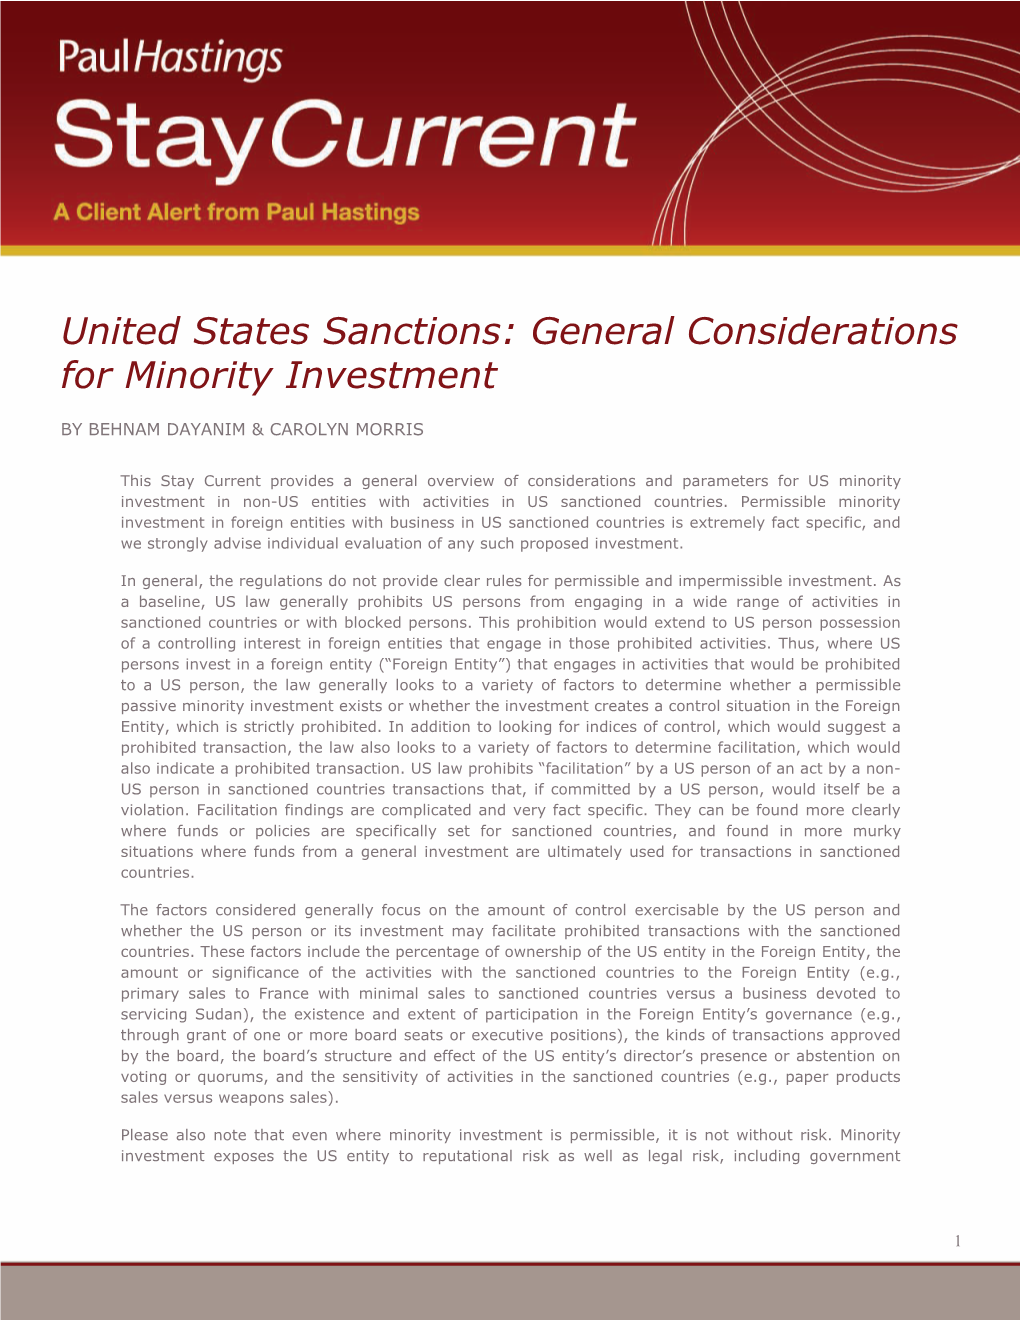 United States Sanctions: General Considerations for Minority Investment